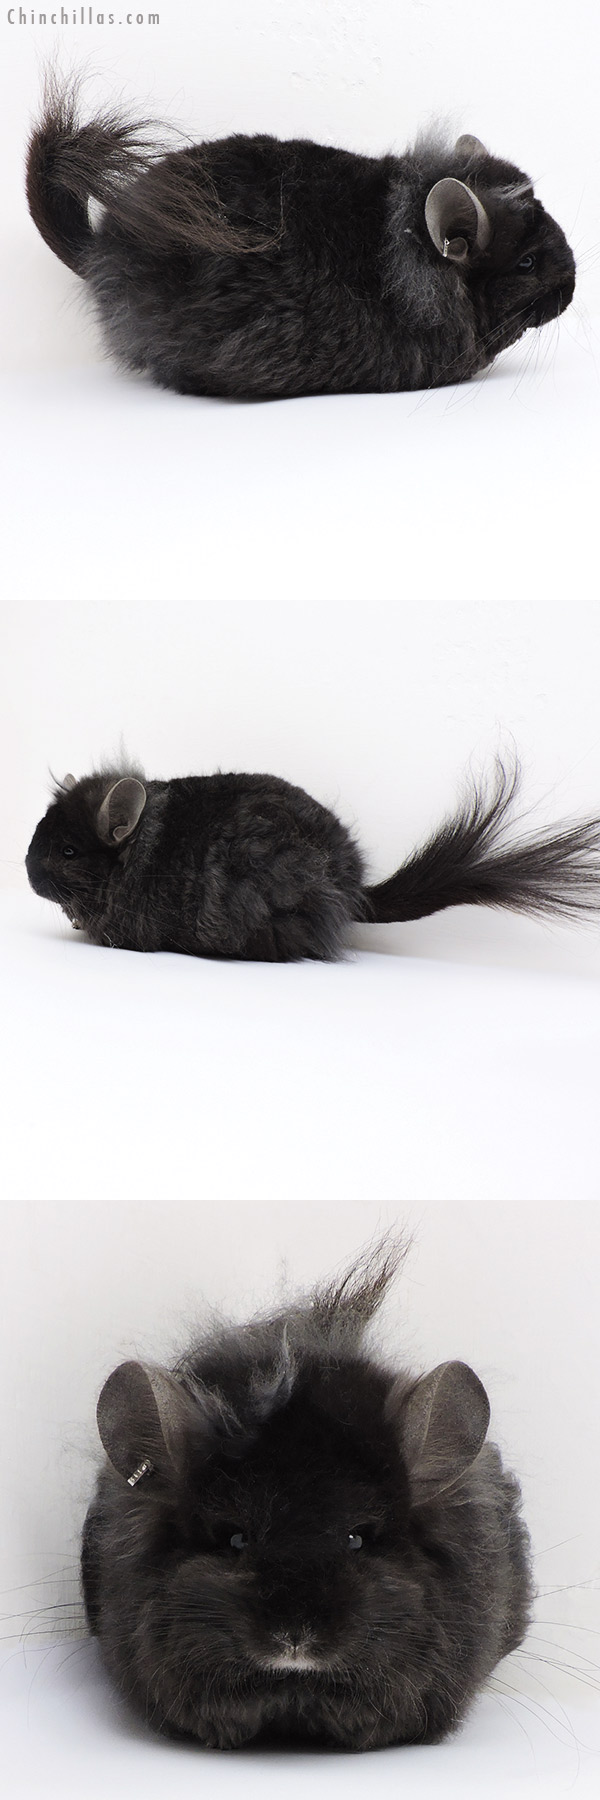 Chinchilla or related item offered for sale or export on Chinchillas.com - 18176 Exceptional Ebony G2  Royal Imperial Angora Female Chinchilla with Lion Mane